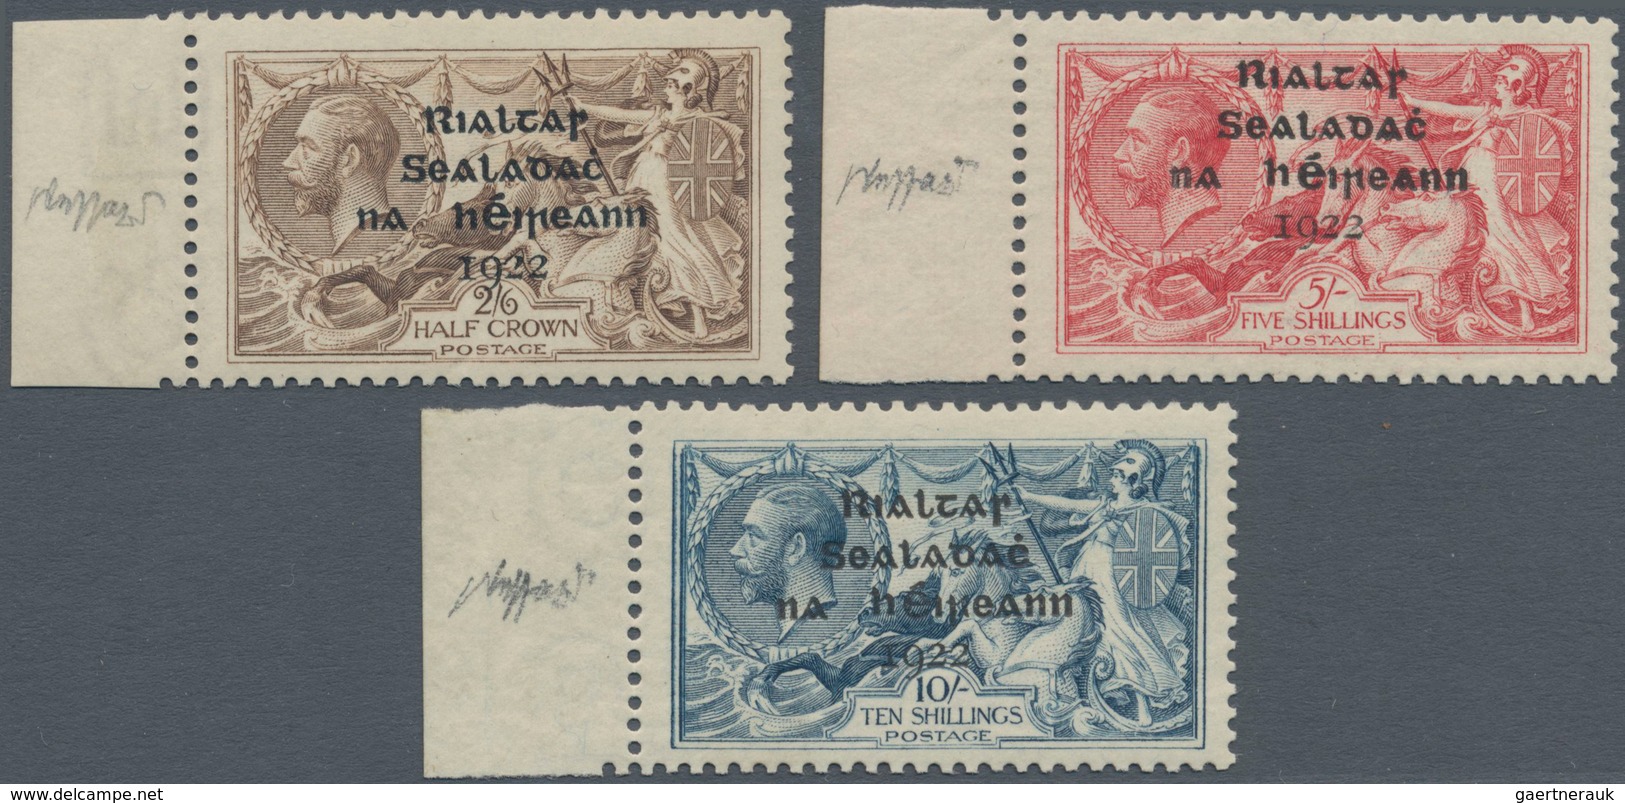 Irland: 1922, Rialtas Overprints, Dollard Printing, 2s.6d. Brown, 5s. Rose-carmine And 10s. Dull Gre - Lettres & Documents